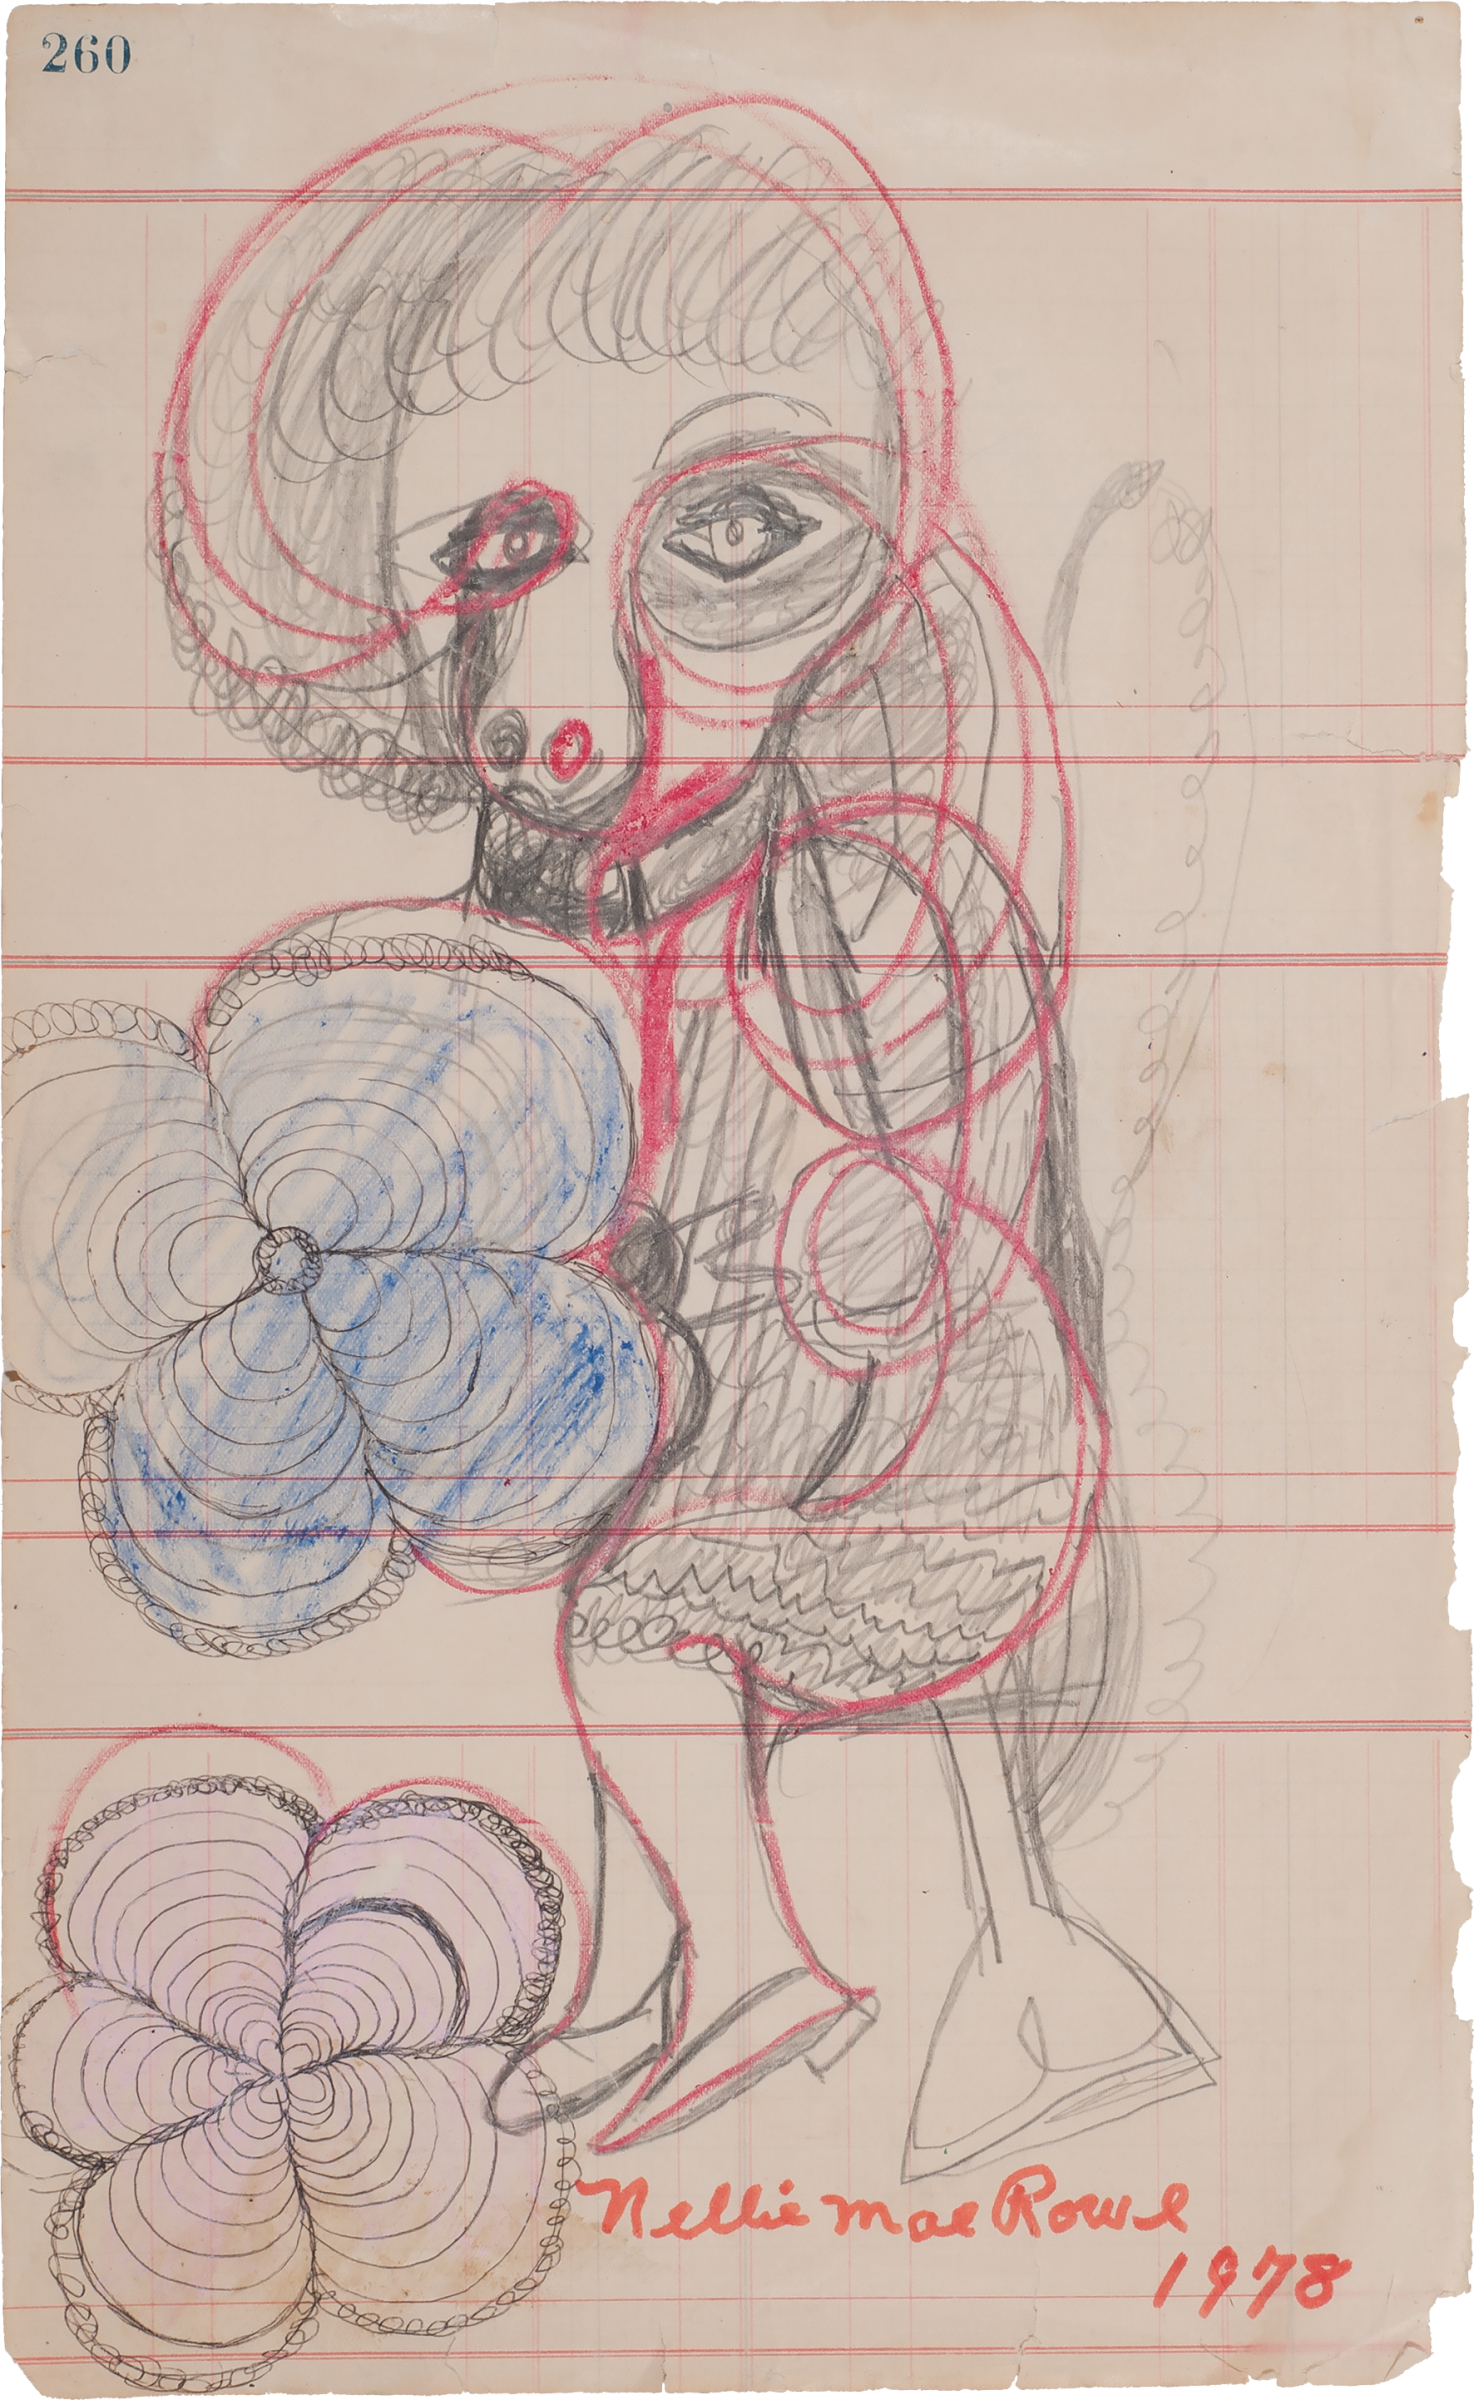 Sketch of a creature in graphite pencil and red colored pencil with front-facing eyes and nose, with a blue flower to the left and uncolored flower in lower left.